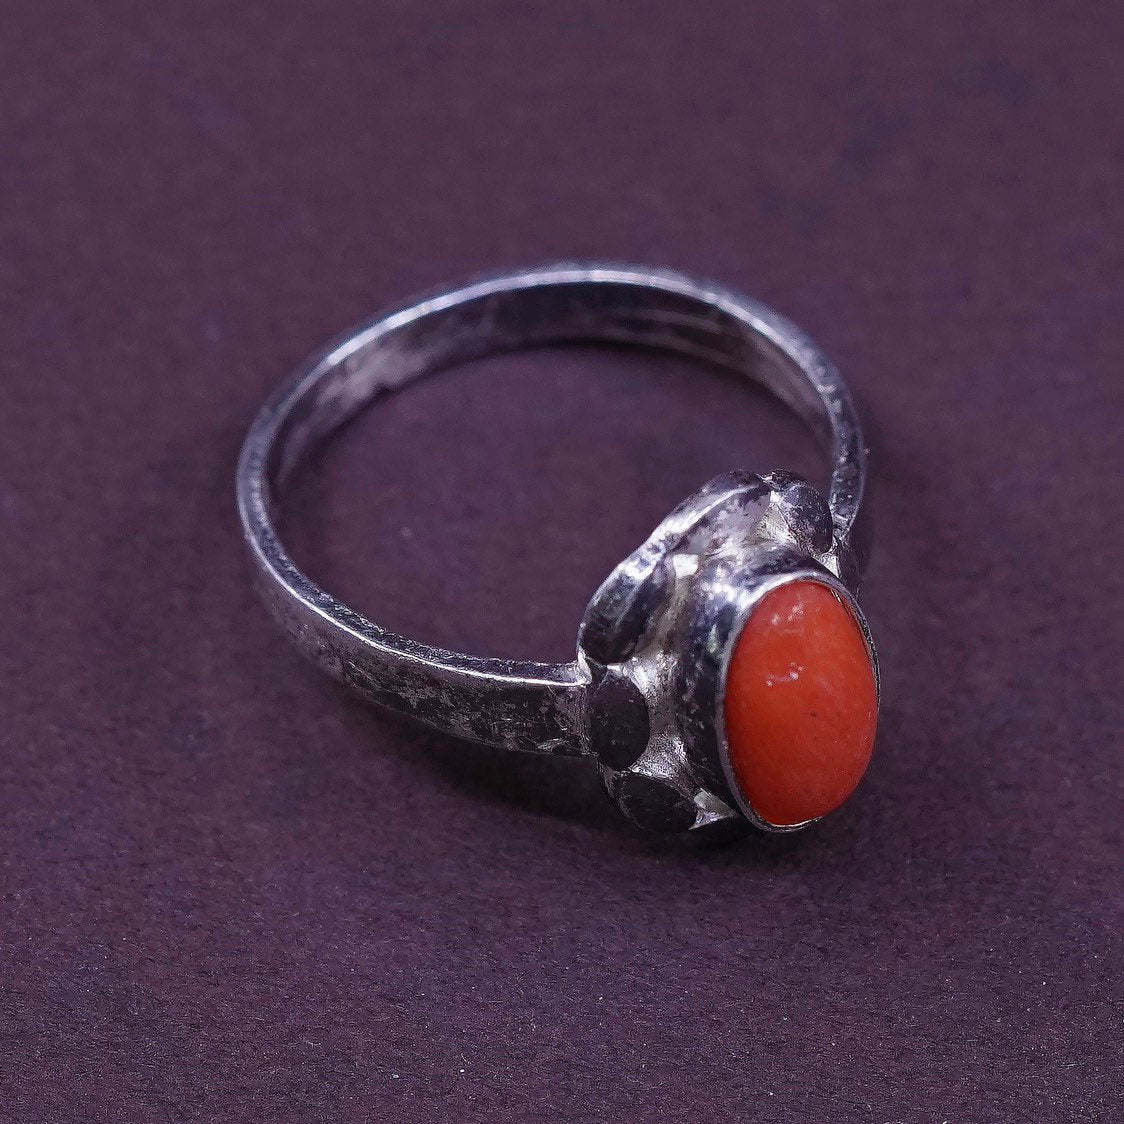 sz 3.75, Sterling silver ring w/ coral, Native American, southwestern 925 band